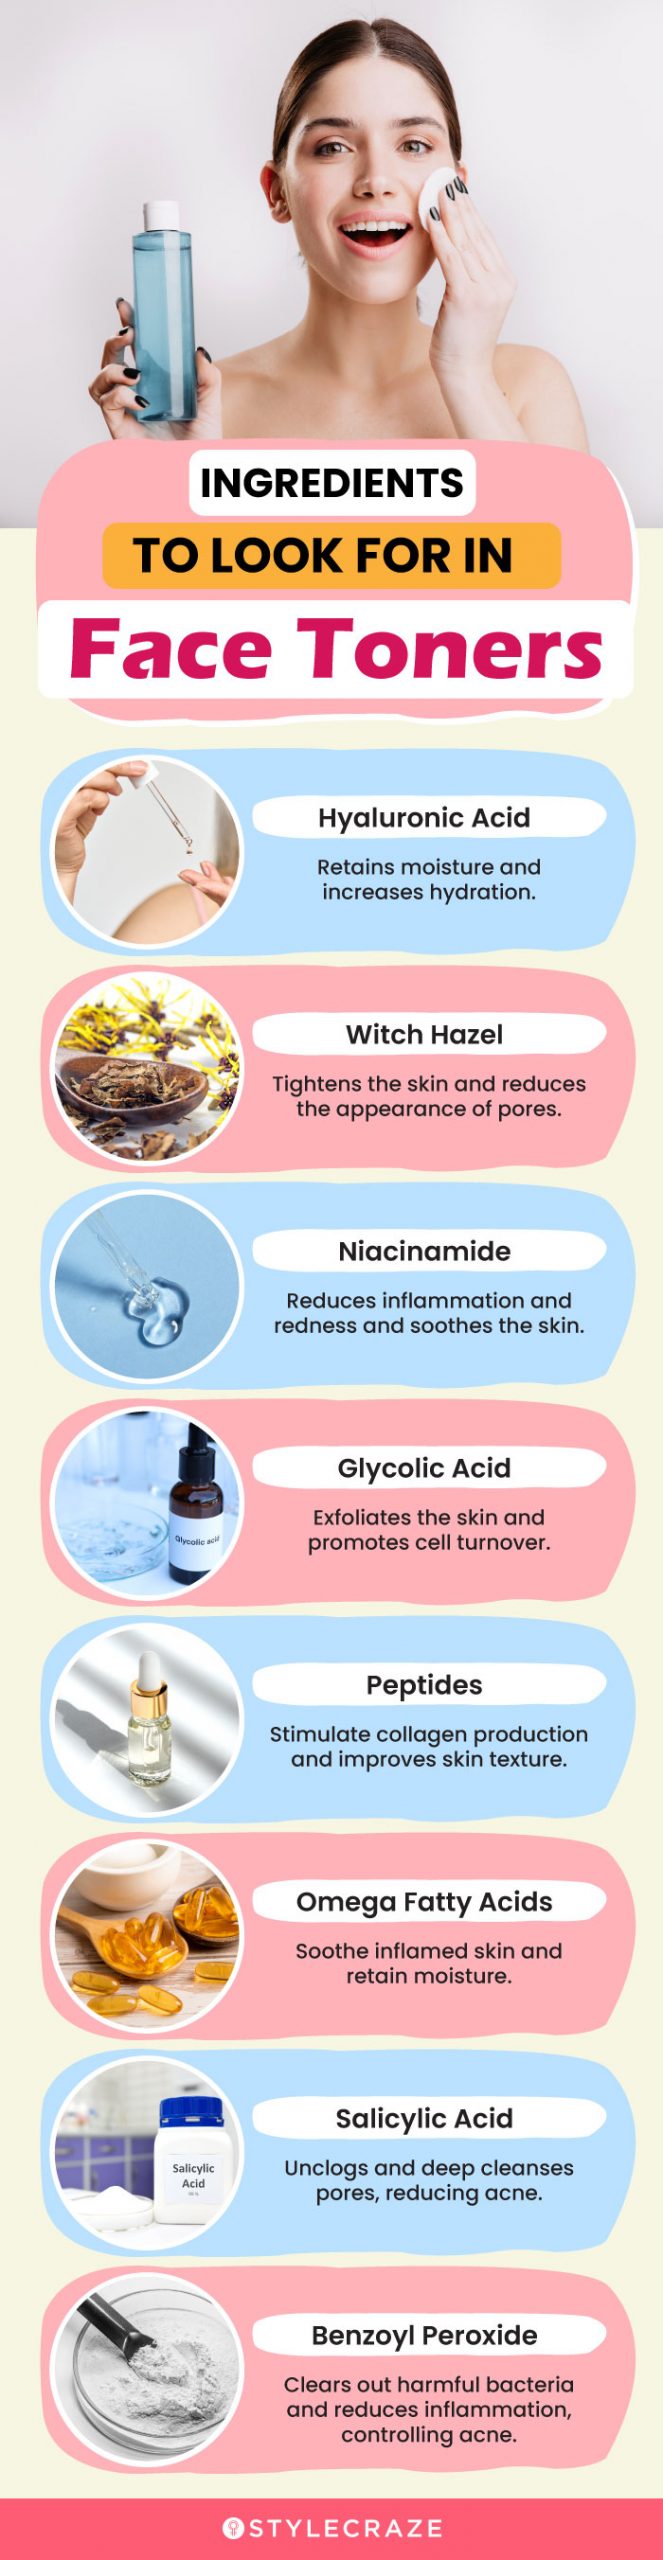 Face Toners: Ingredients To Look For & Avoid (infographic)